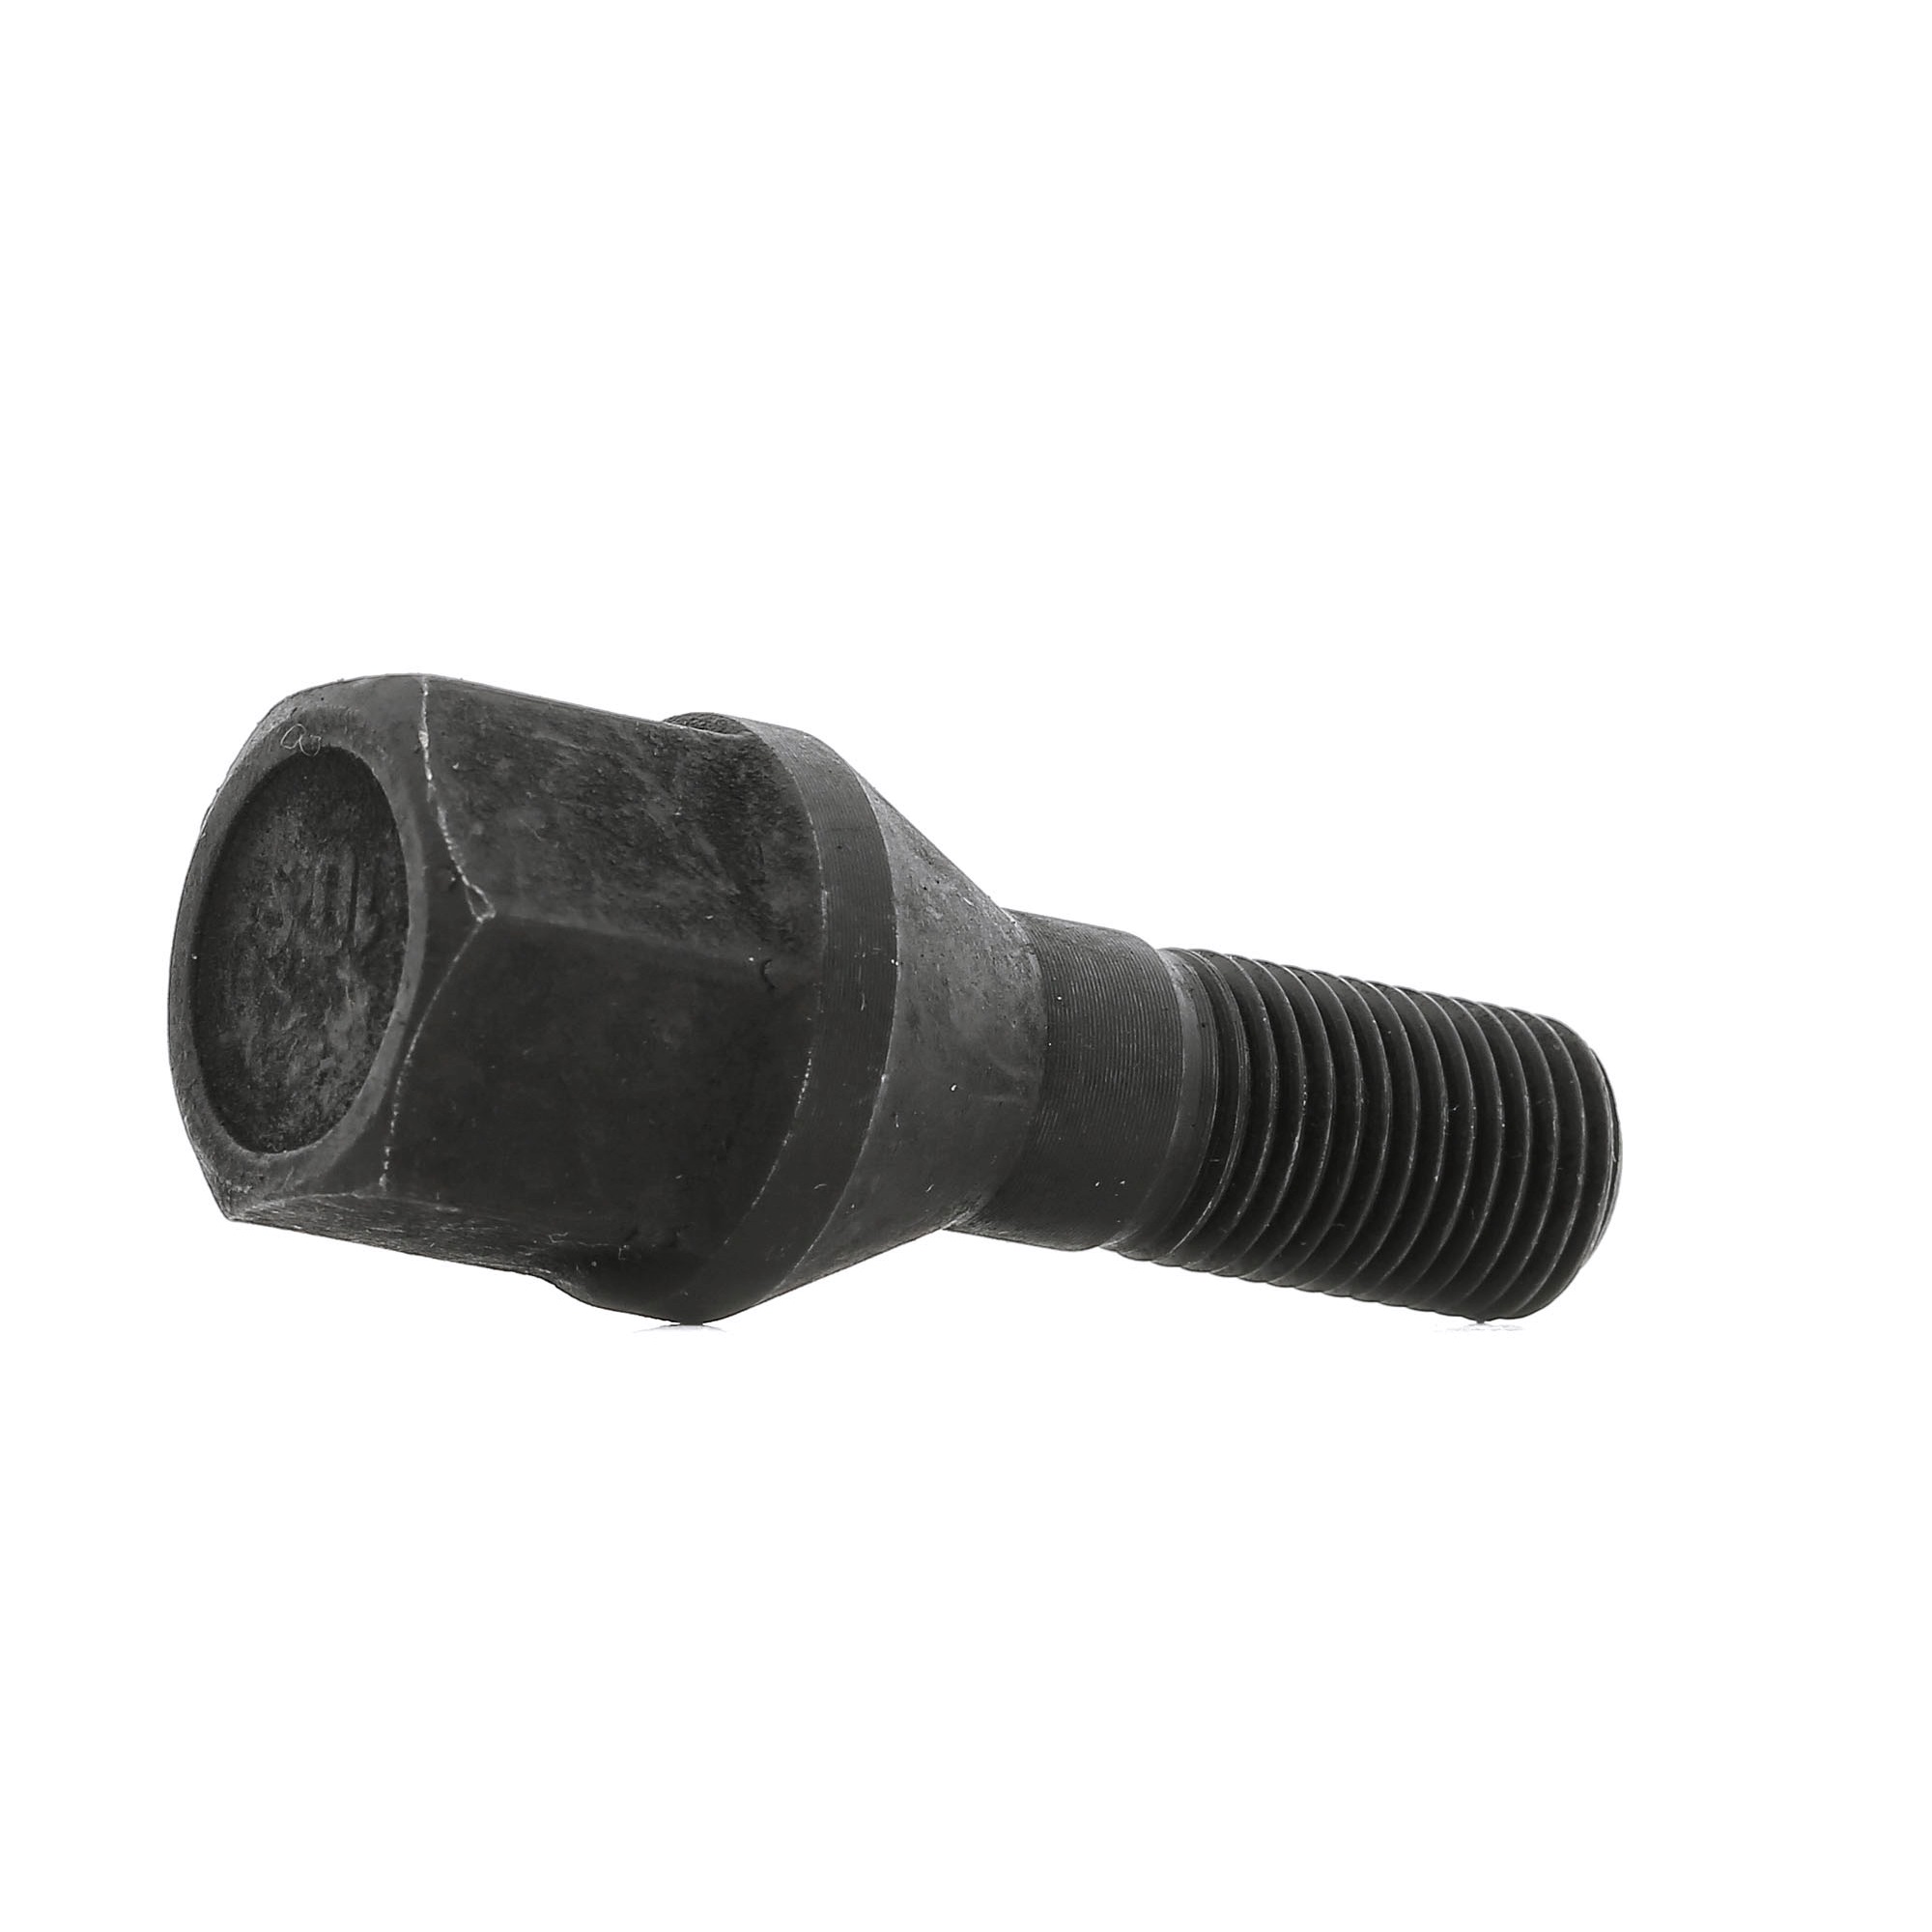 AIC 52917 Wheel Bolt M12 x 1,25, 17 mm, 10,9, for steel rims, SW19, Male Hex